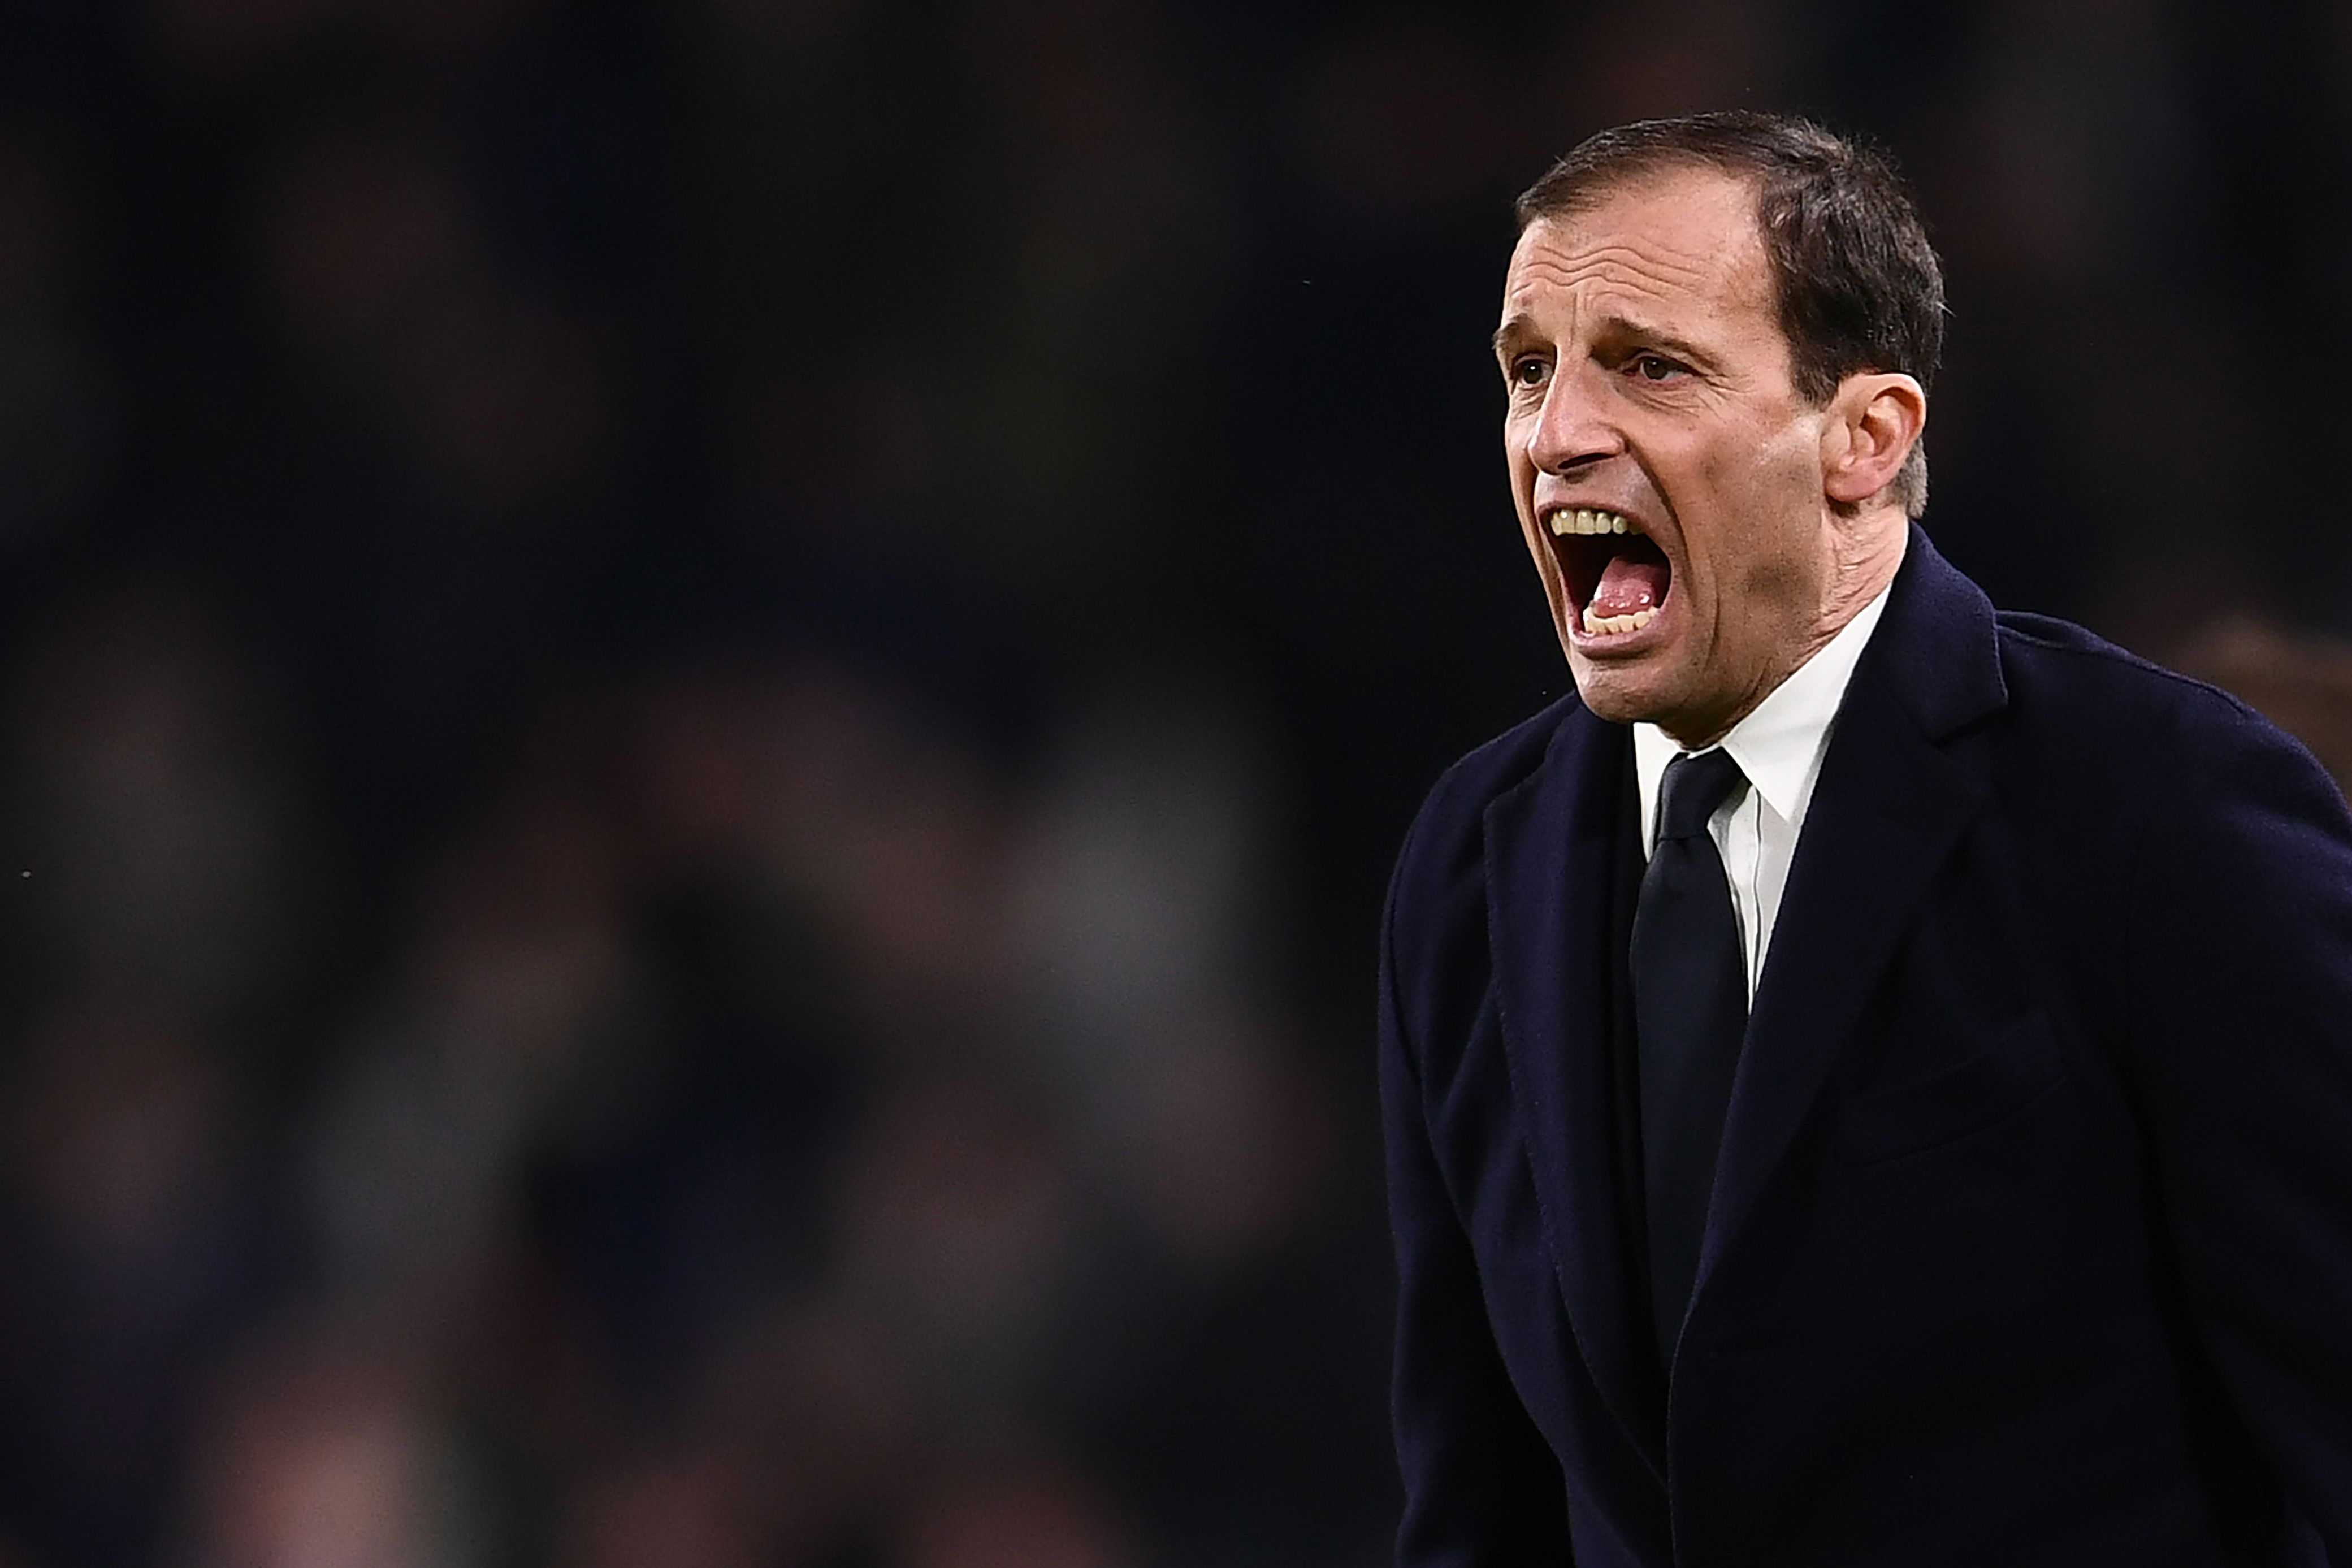 Juventus' Italian coach Massimiliano Allegri shouts during the Italian Serie A football match between Juventus and Atalanta on March 14, 2018 at the Allianz Stadium in Turin. / AFP PHOTO / MARCO BERTORELLO        (Photo credit should read MARCO BERTORELLO/AFP/Getty Images)